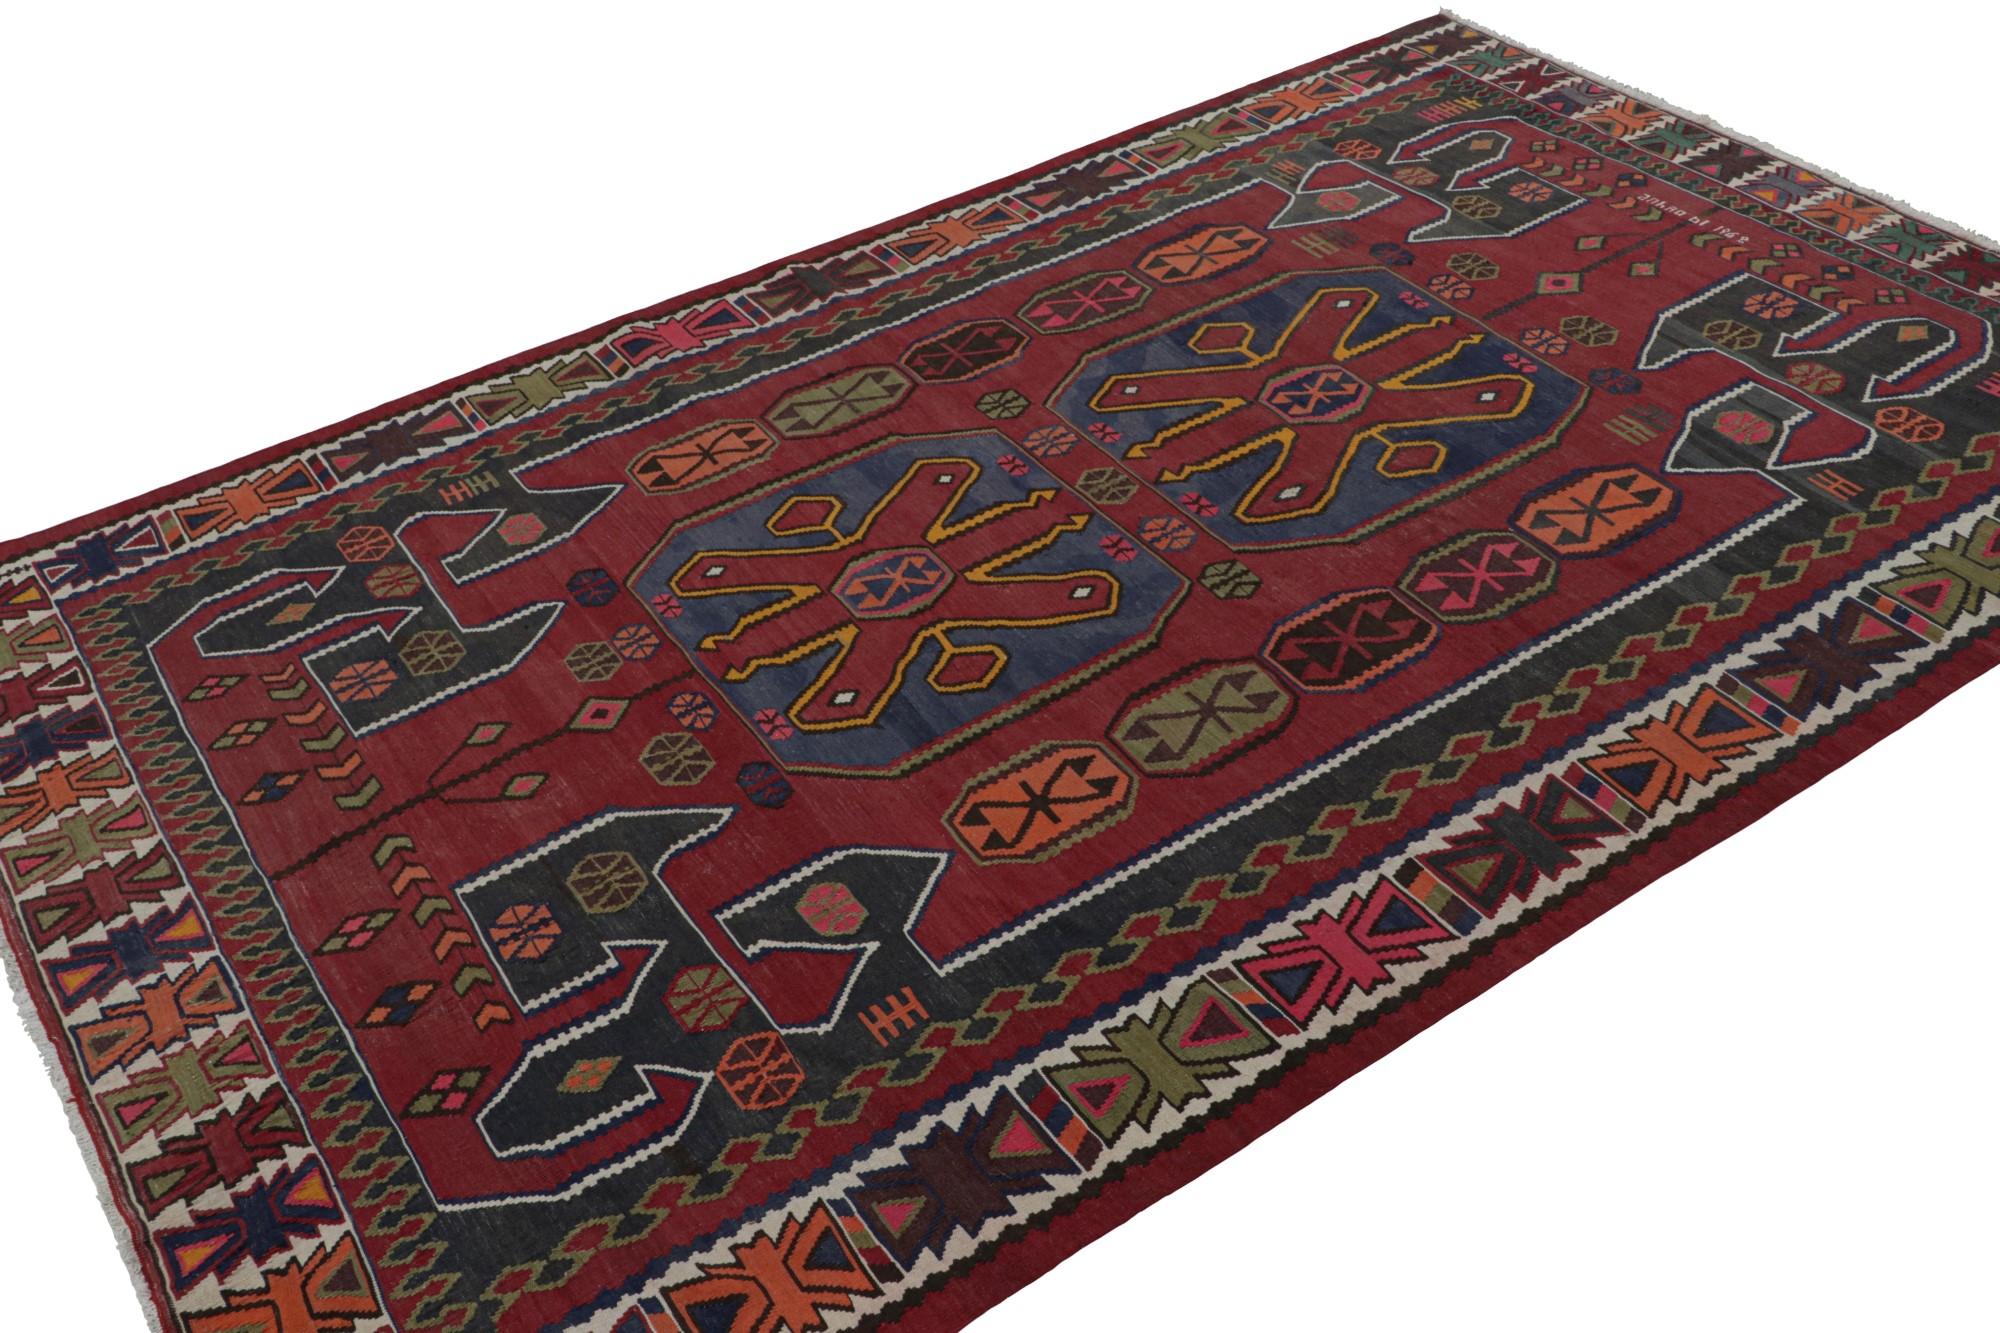 Hand knotted in wool, this 6x9 vintage Afghan tribal kilim rug with its all over geometric patterns, is a very special collectible piece of unusual orientation, according to our Principal, Jahanshah Nazmiyal. 

On the Design: 

This design enjoys